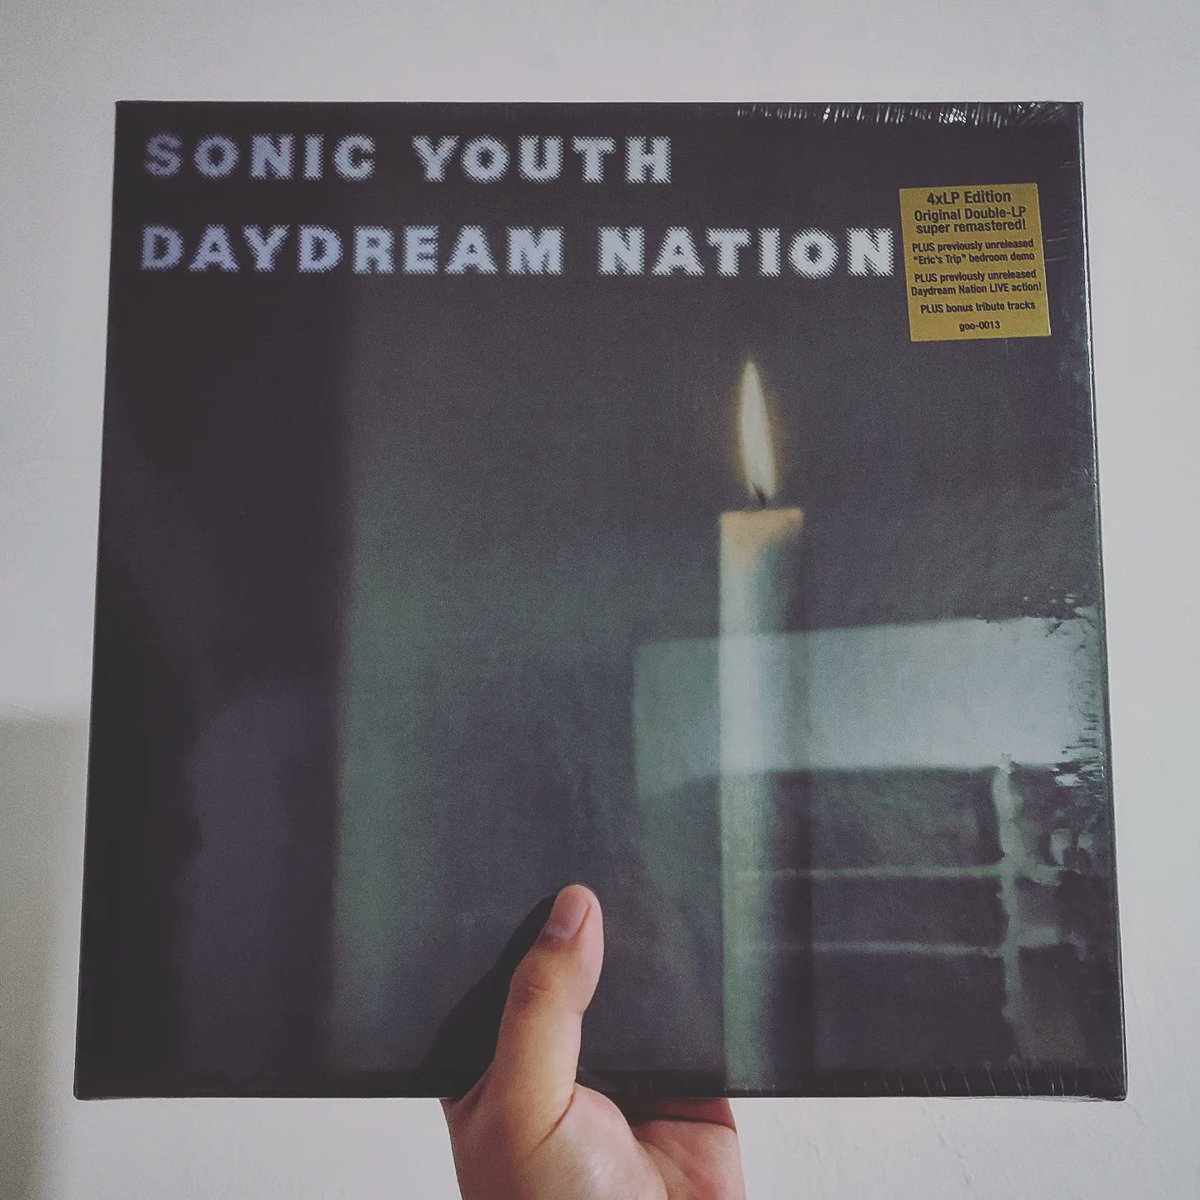 Daydreaming Days. #SonicYouth #DaydreamNation #35thAnniversary